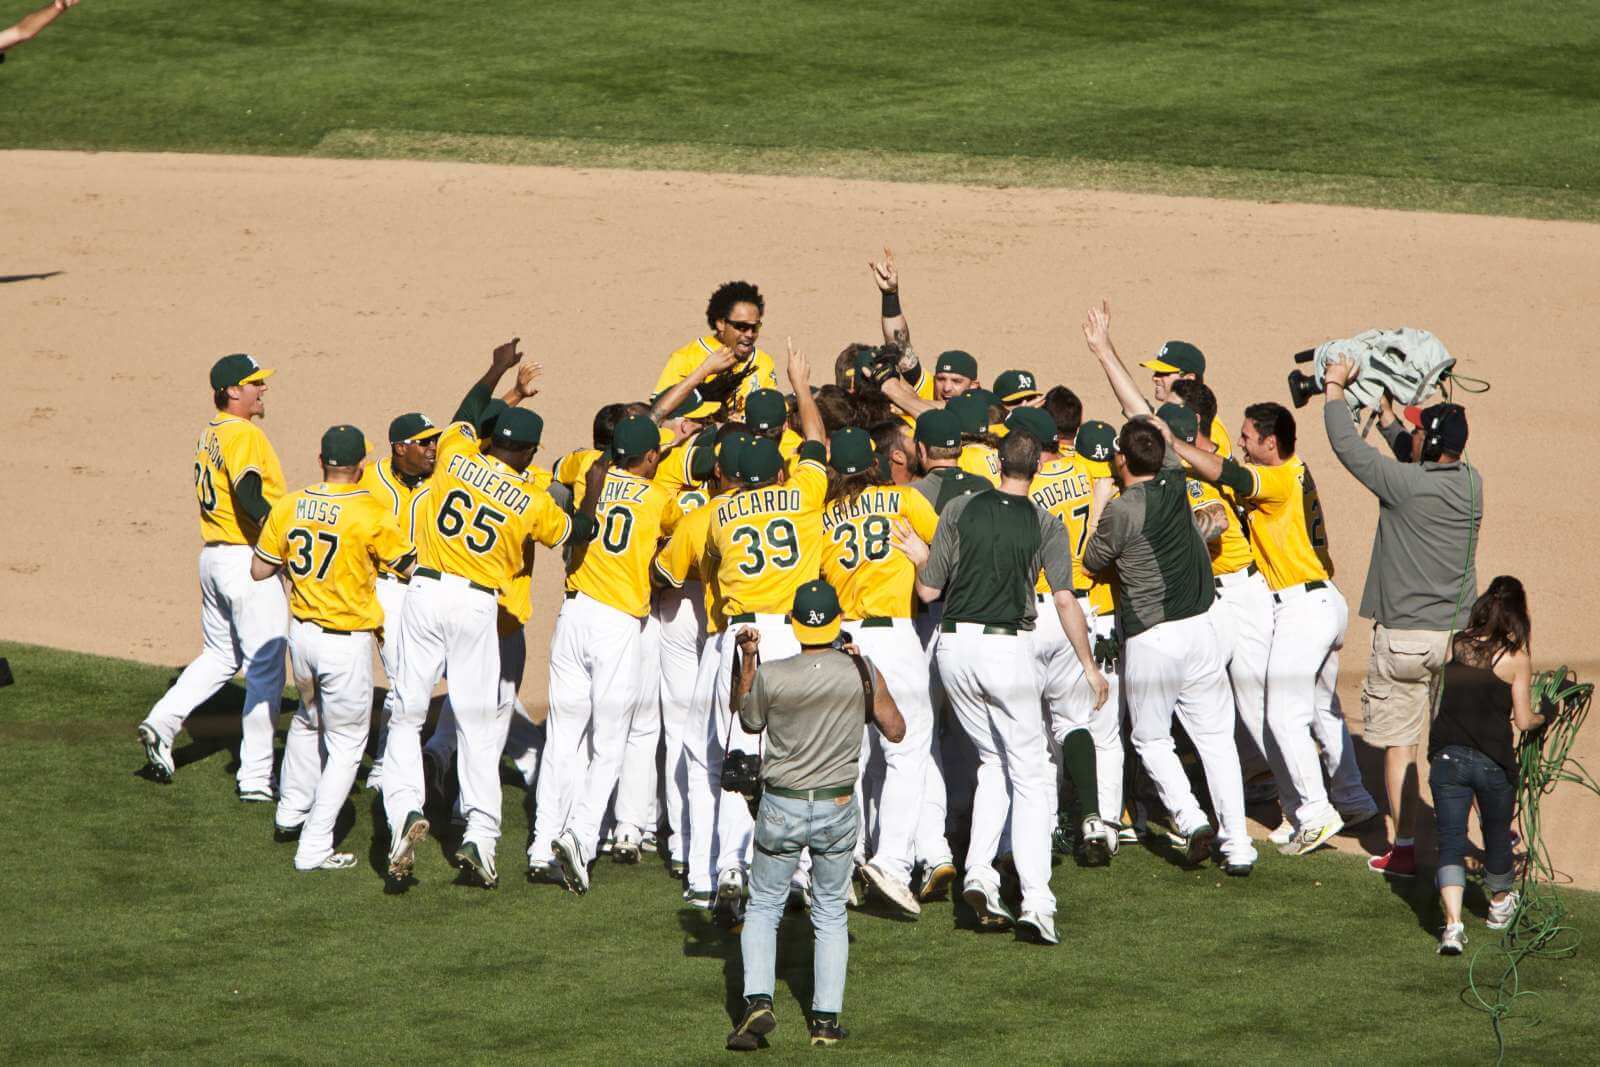 The Oakland A's celebrate after winning 2012 American League West. (Ali Thanawalla/SFBay)